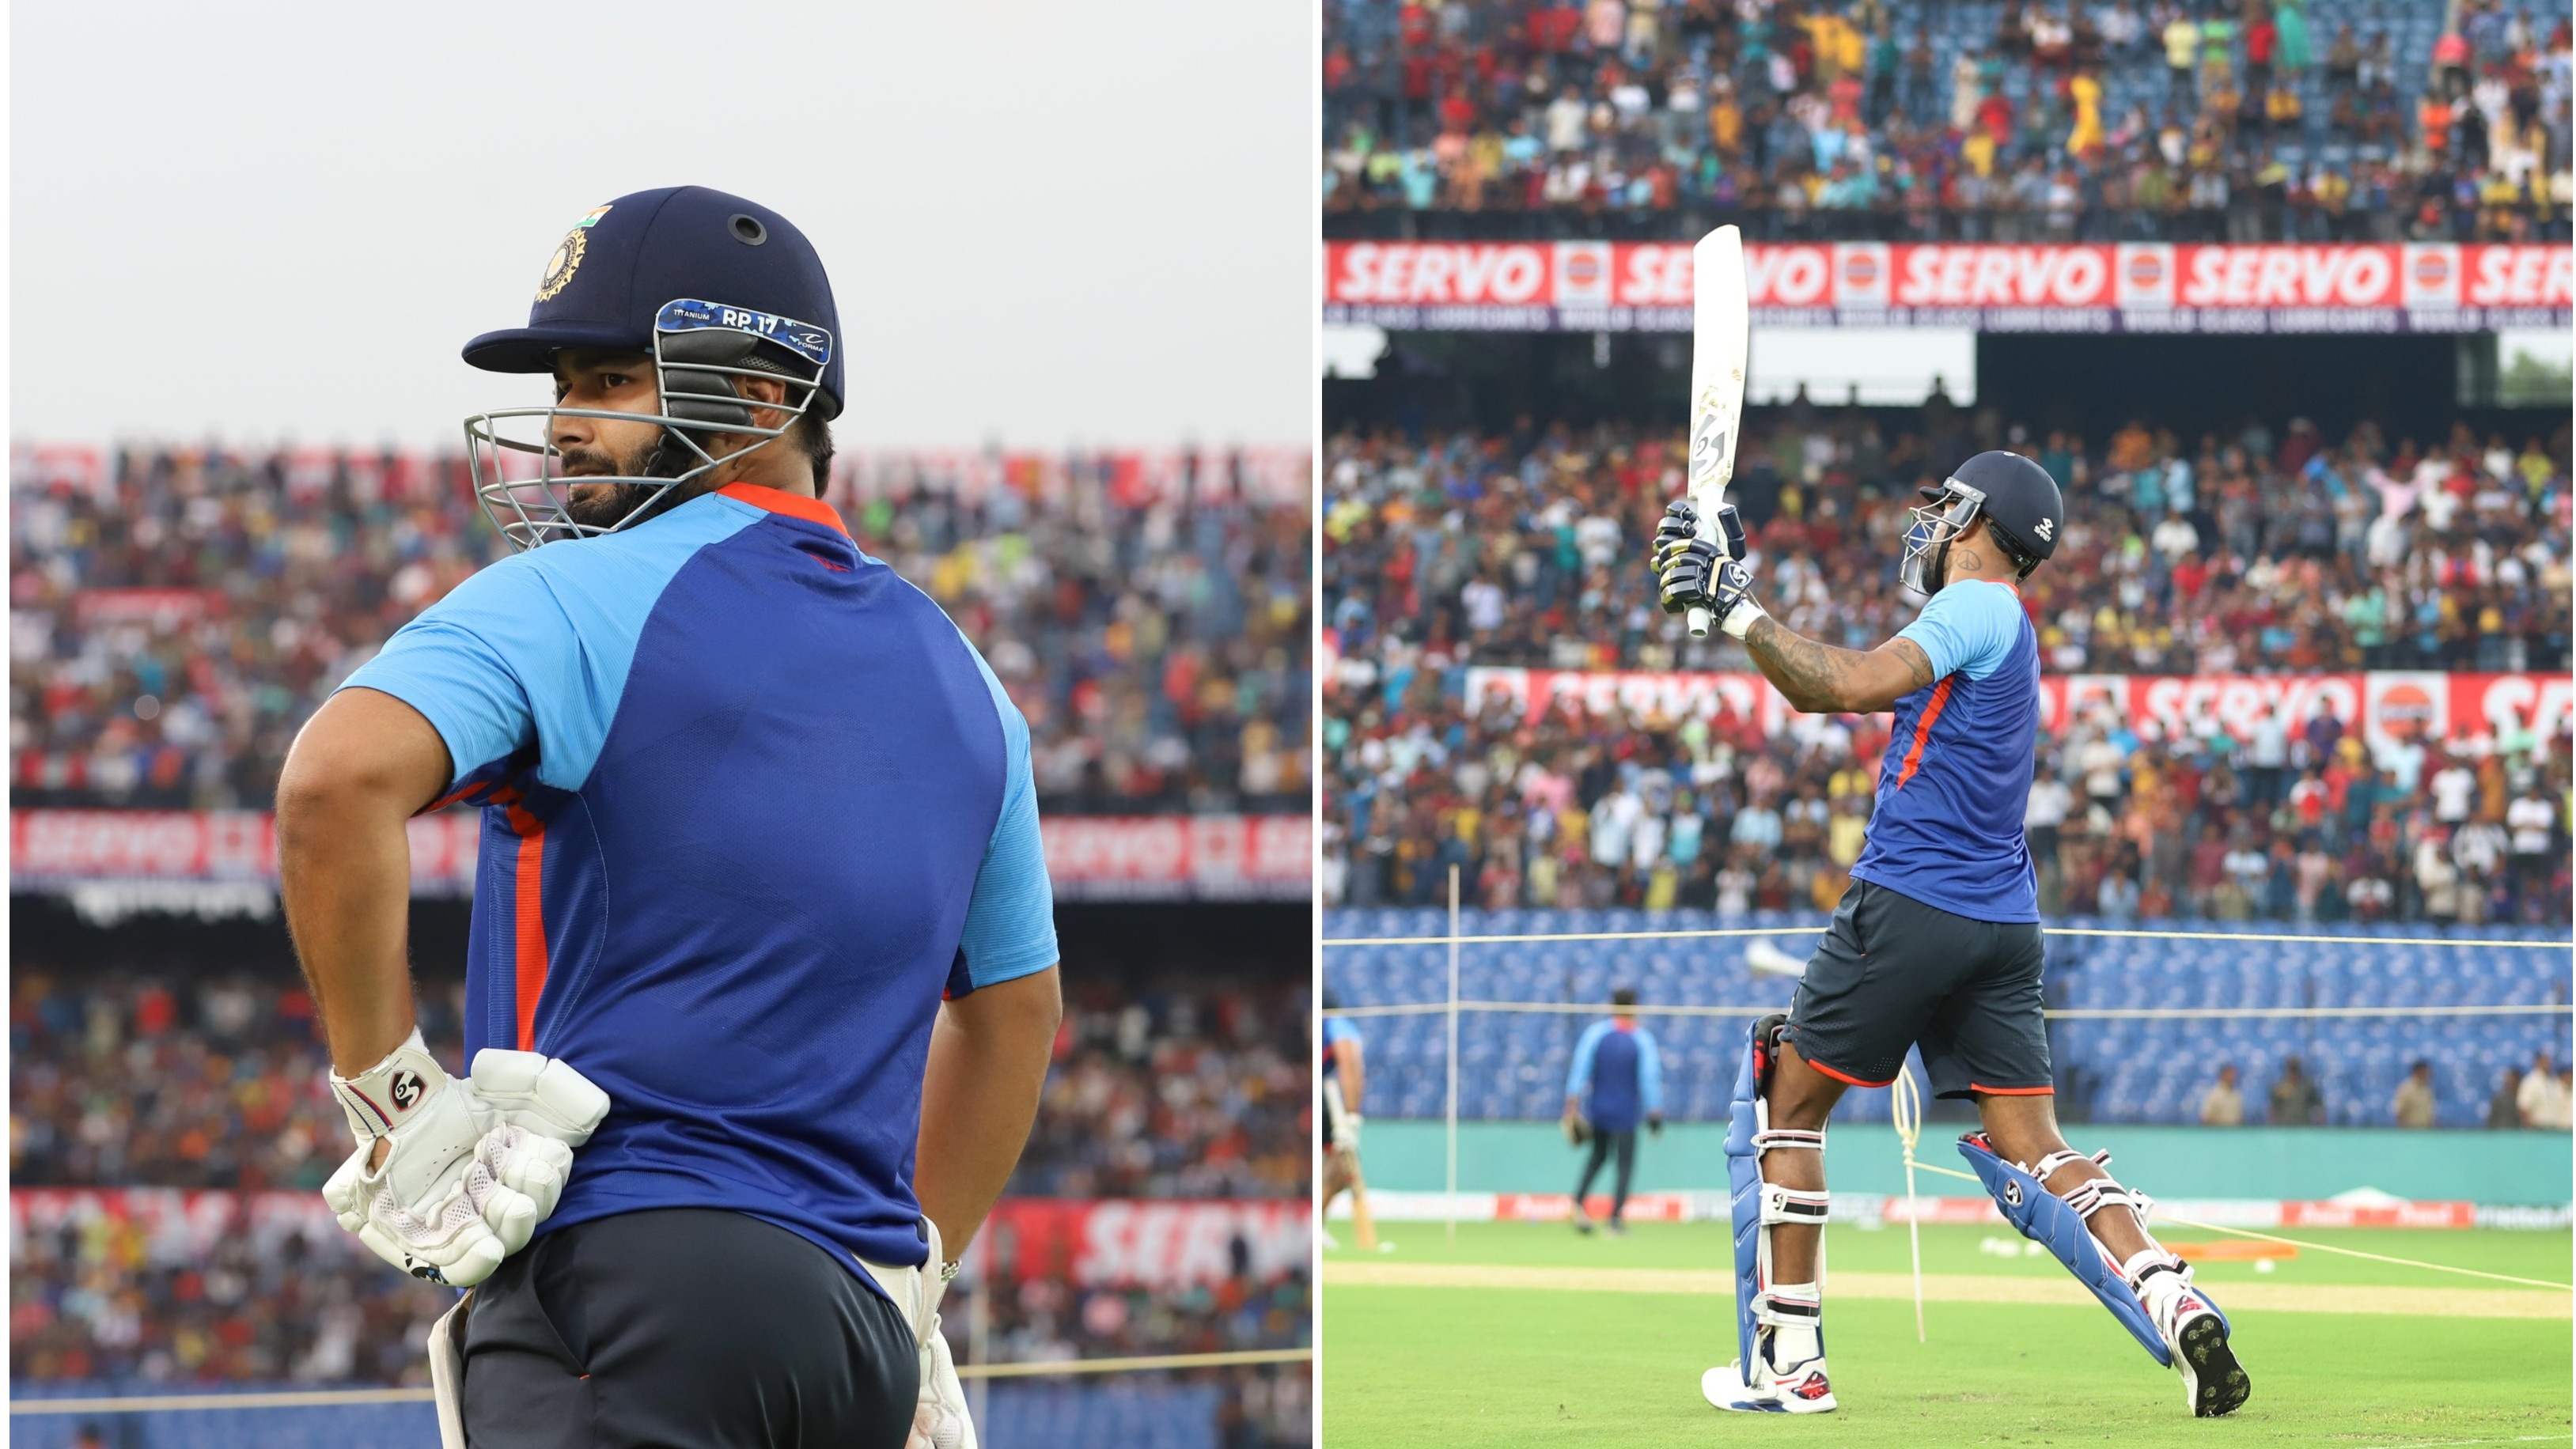 IND v SA 2022: WATCH – Capacity crowd turns up in Cuttack to see India’s practice session, cheers for Pant and Pandya